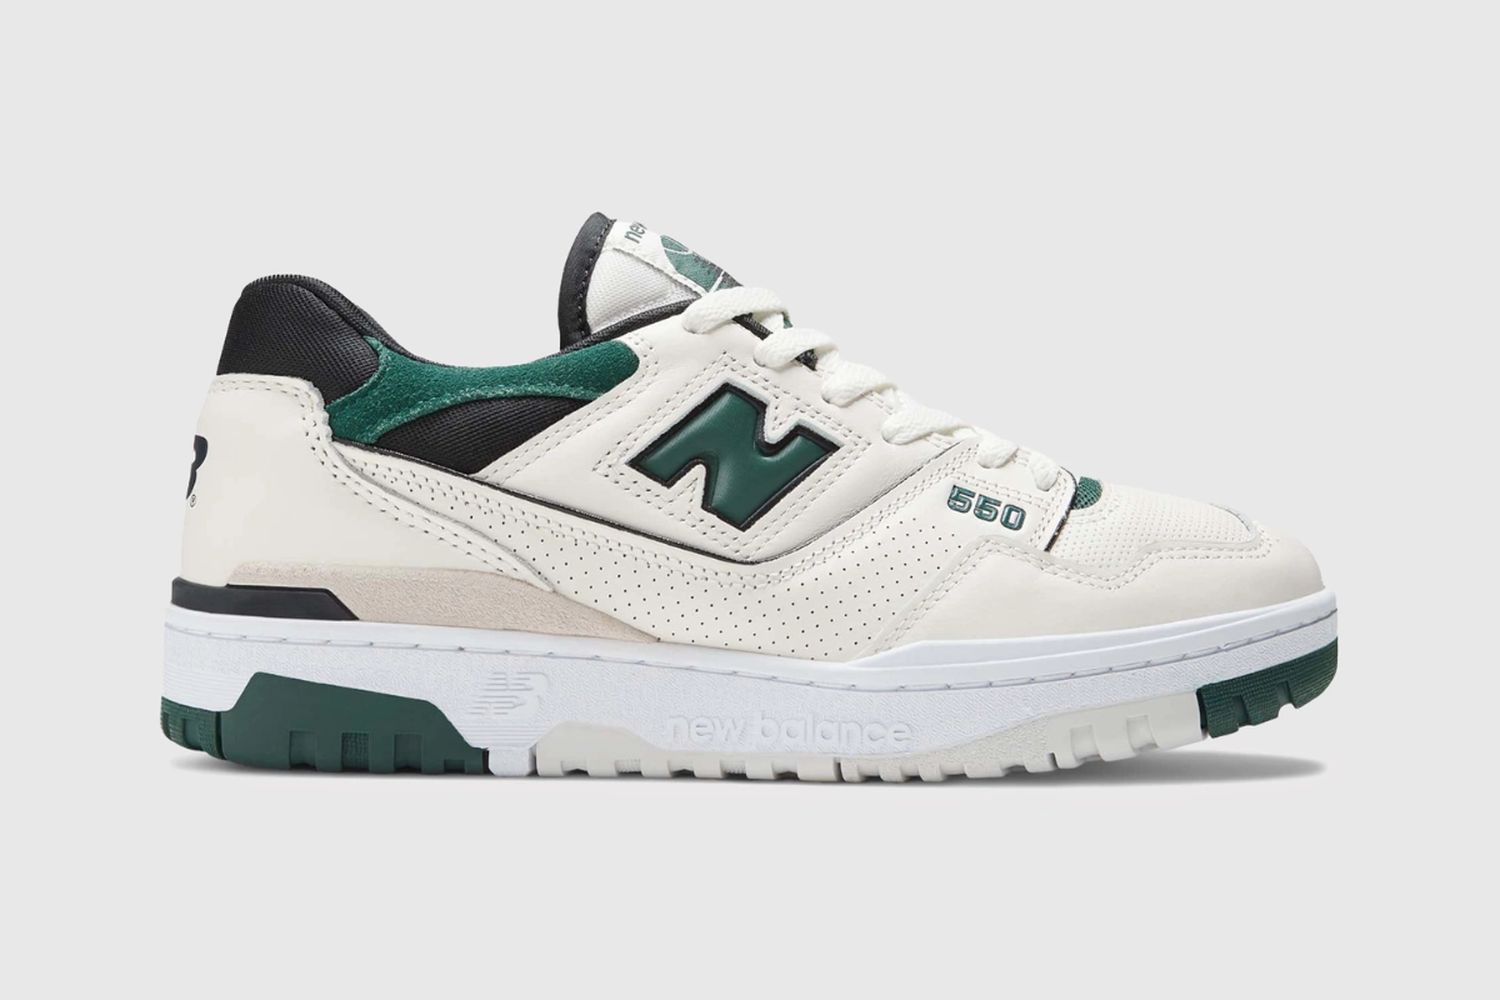 Bengelen Harnas Haiku The Best New Balance Sneakers Available to Buy Right Now